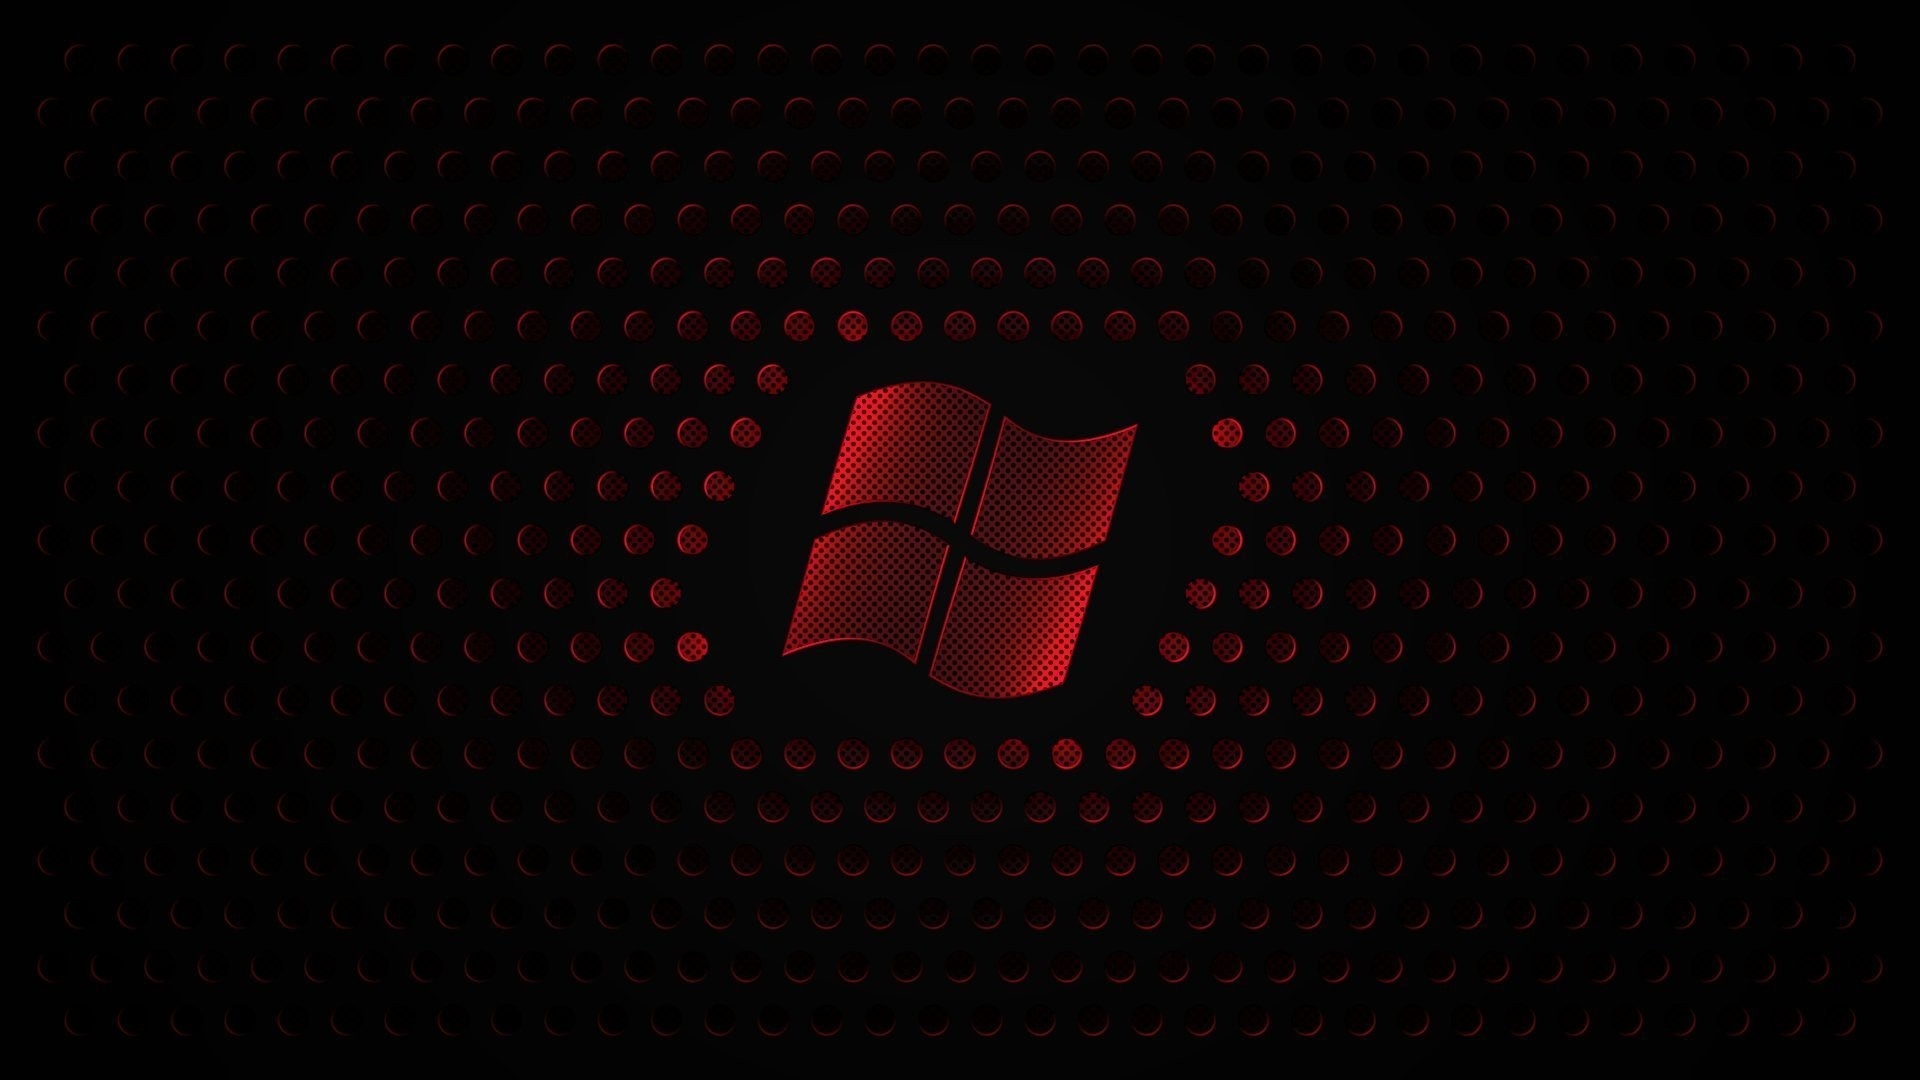 Microsoft: Windows 10, The final version of Windows which supports 32-bit processors. 1920x1080 Full HD Wallpaper.